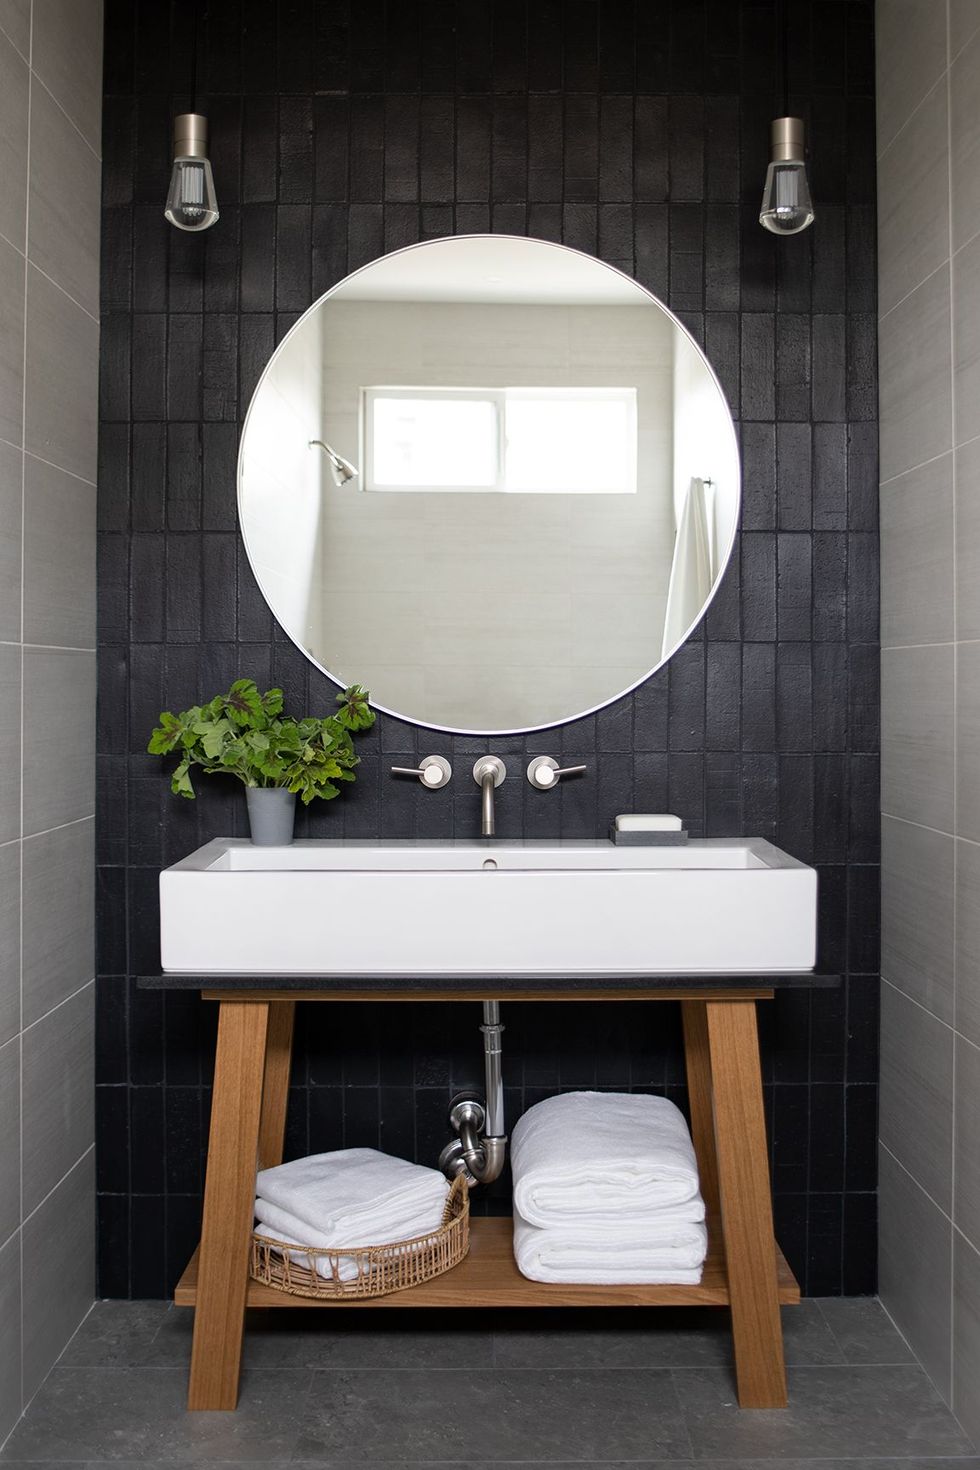 The 12 Trending Bathroom Accessories You Need for 2023